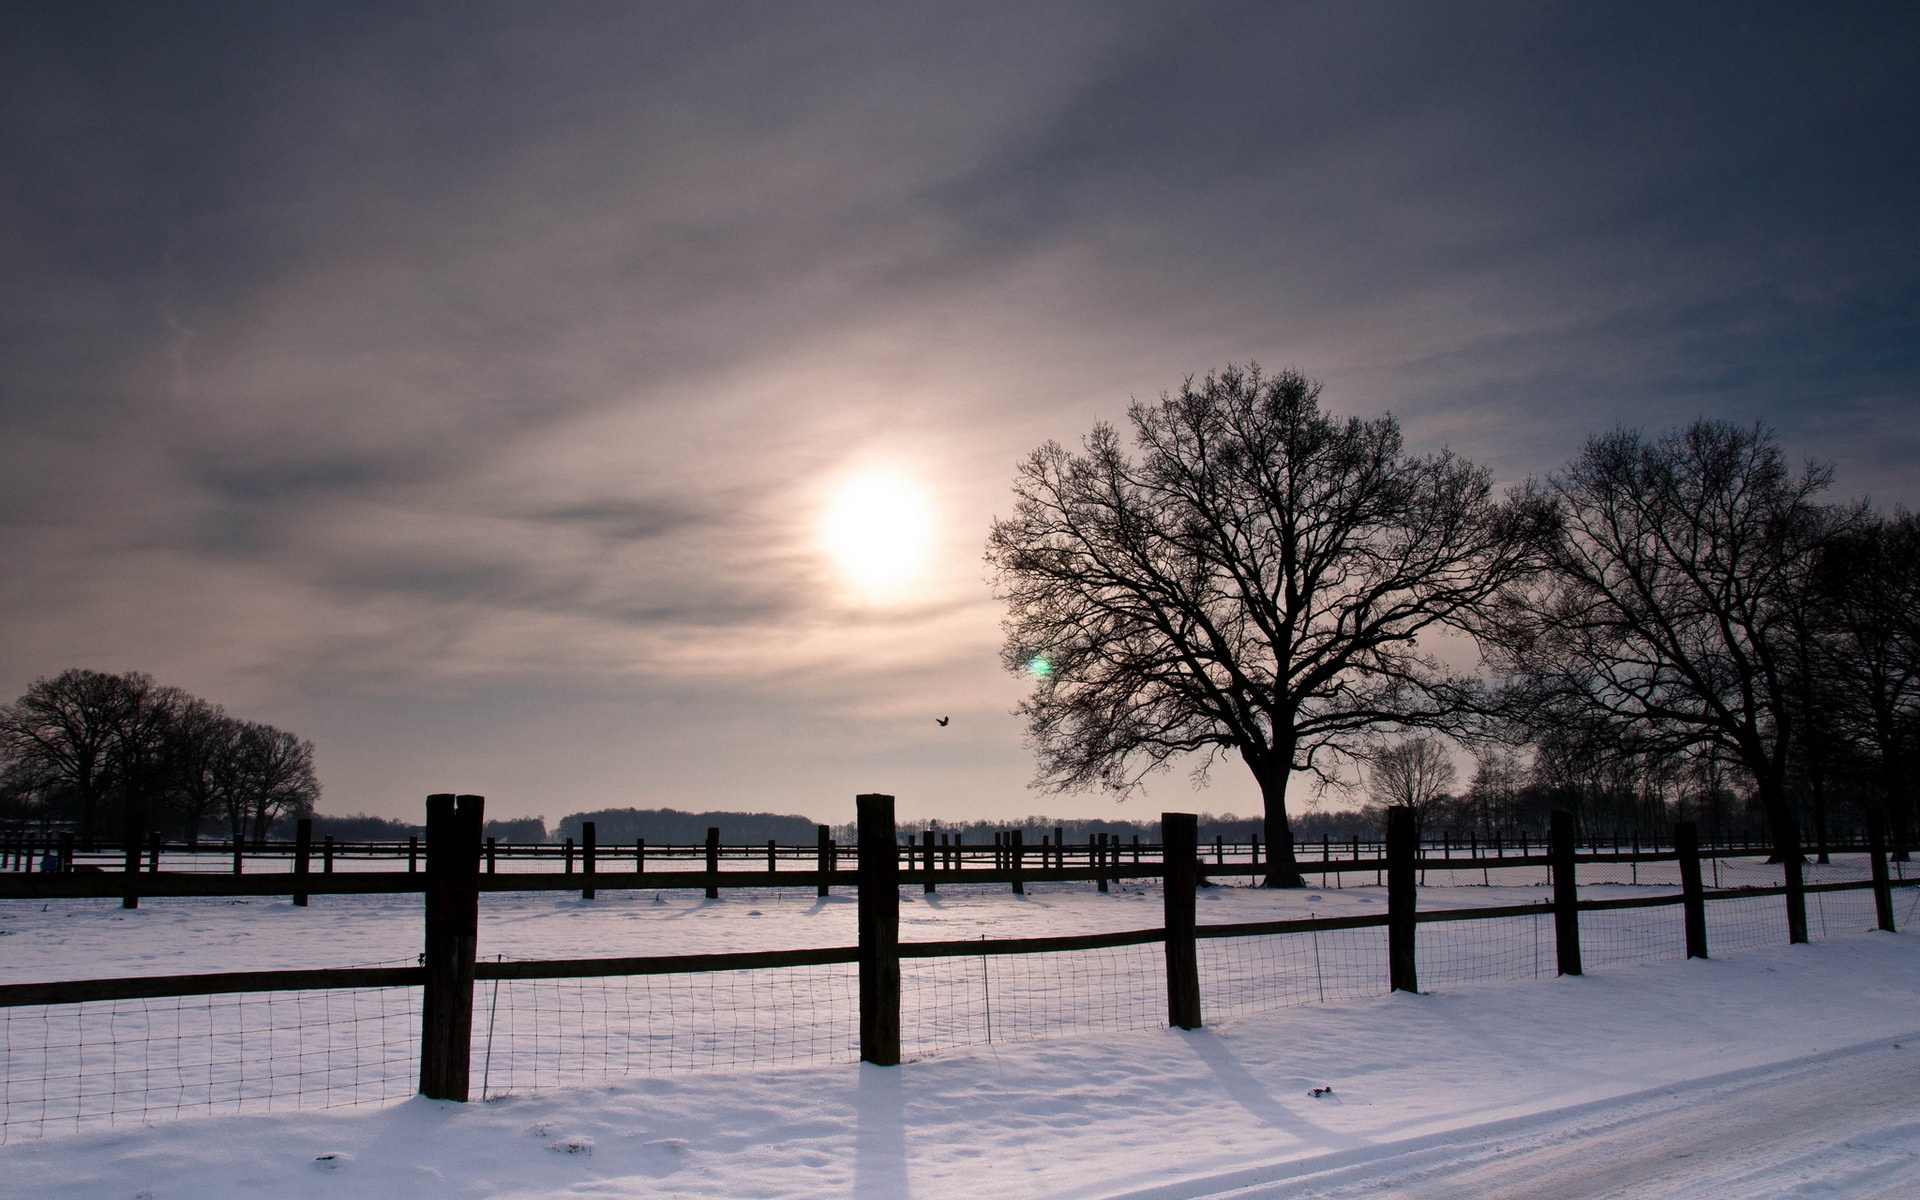 roads, Nature, Landscapes, Winter, Snow, Fence, Fields, Trees, Sunset, Sunrise, Sky, Clouds Wallpaper